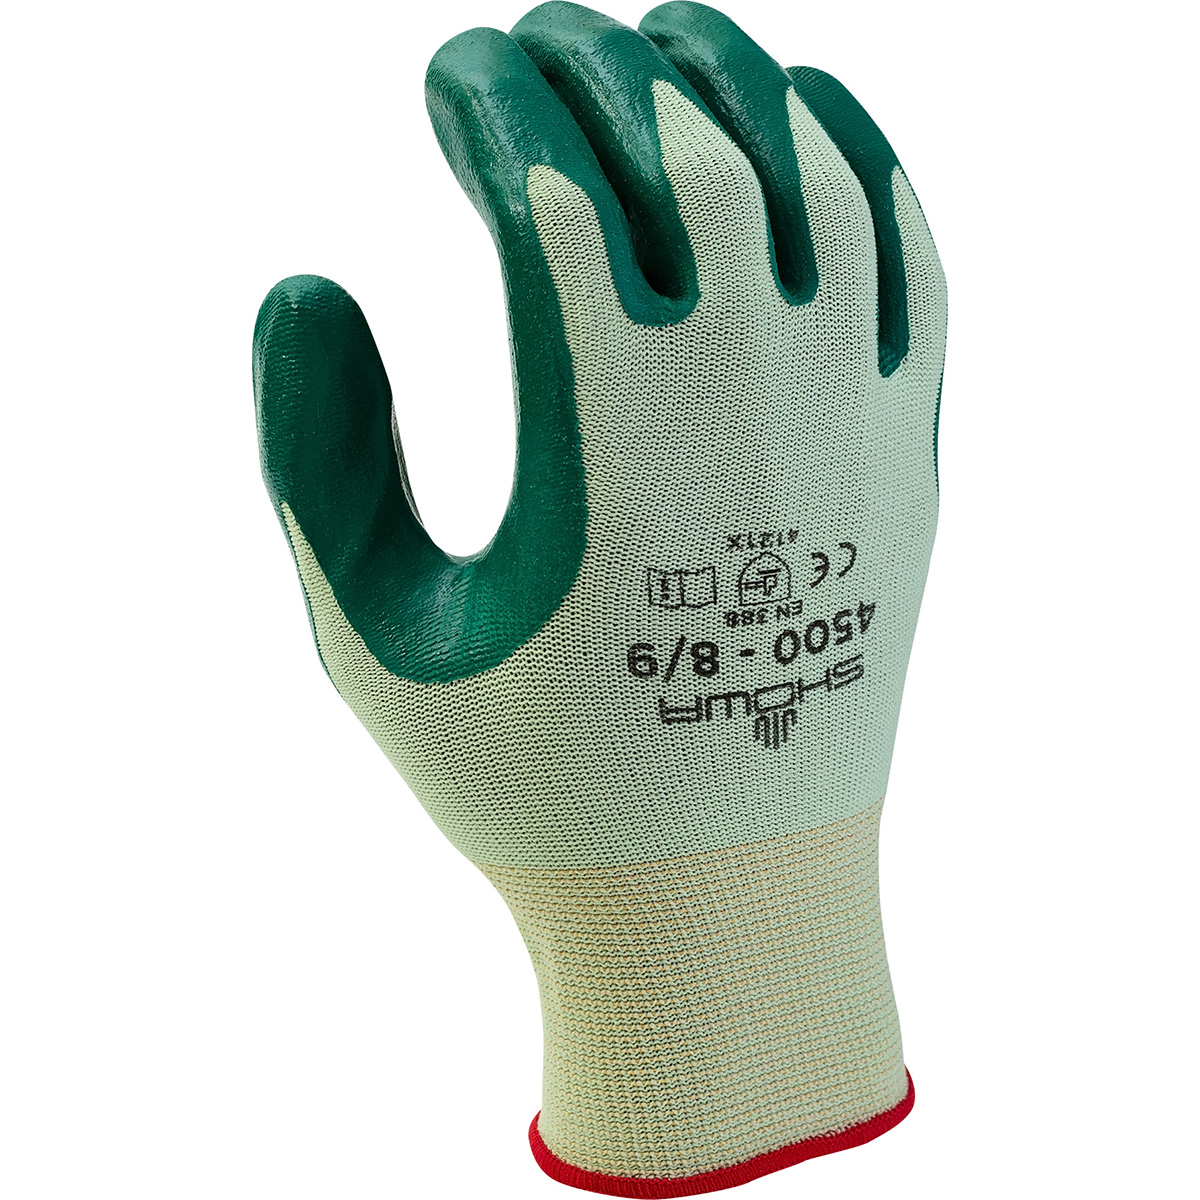 General purpose, nitrile-coated palm-dipped, light green w/green dip, nylon seamless shell, small